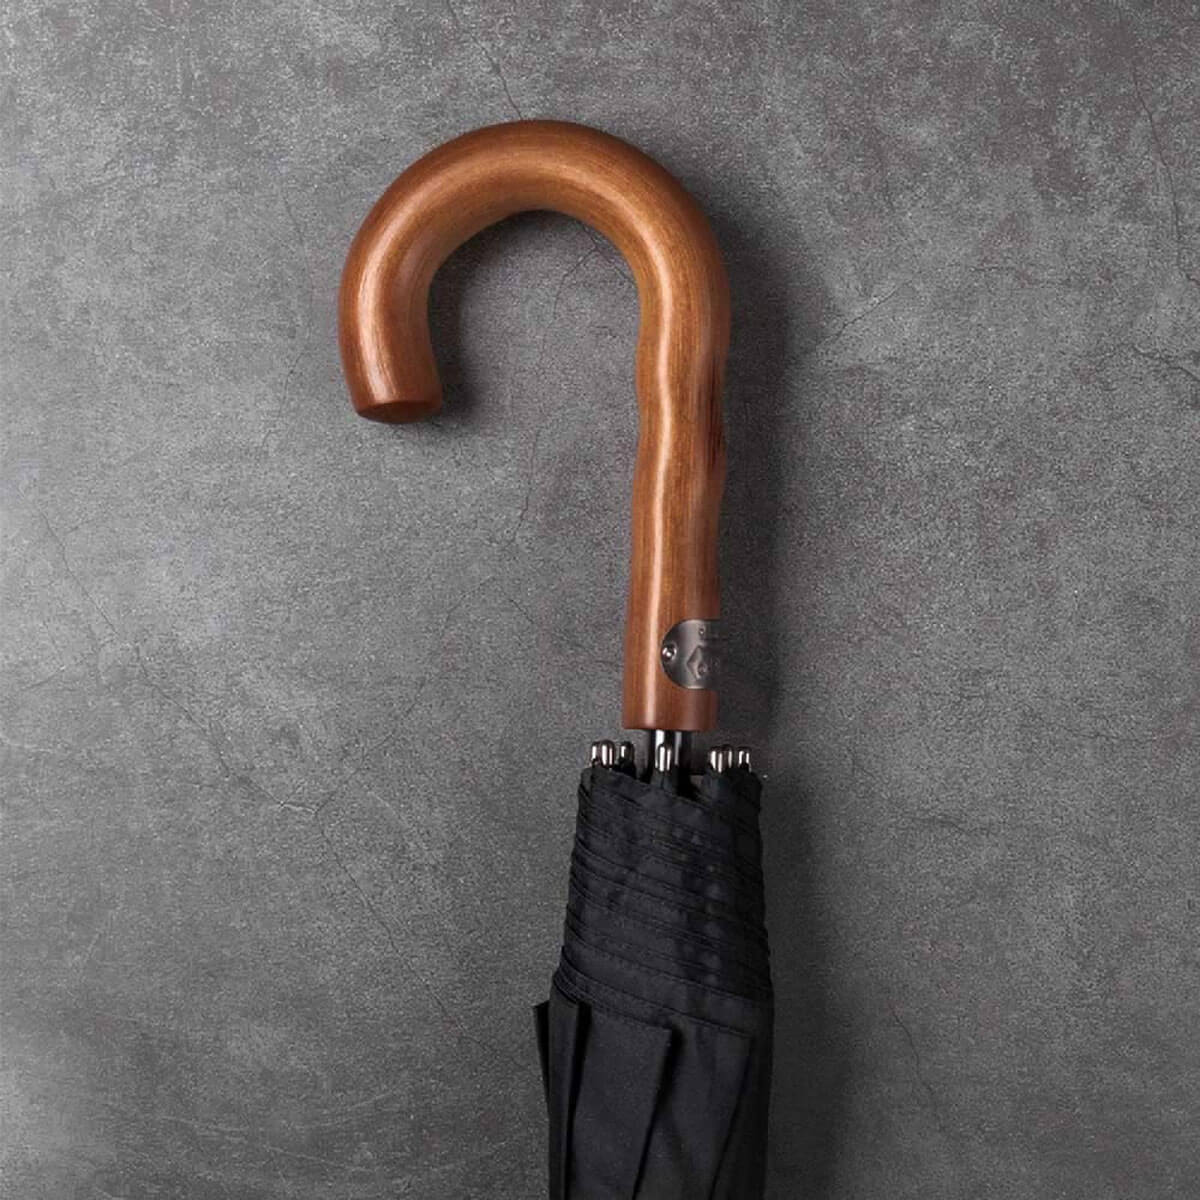 Crafted with a luxurious wooden handle